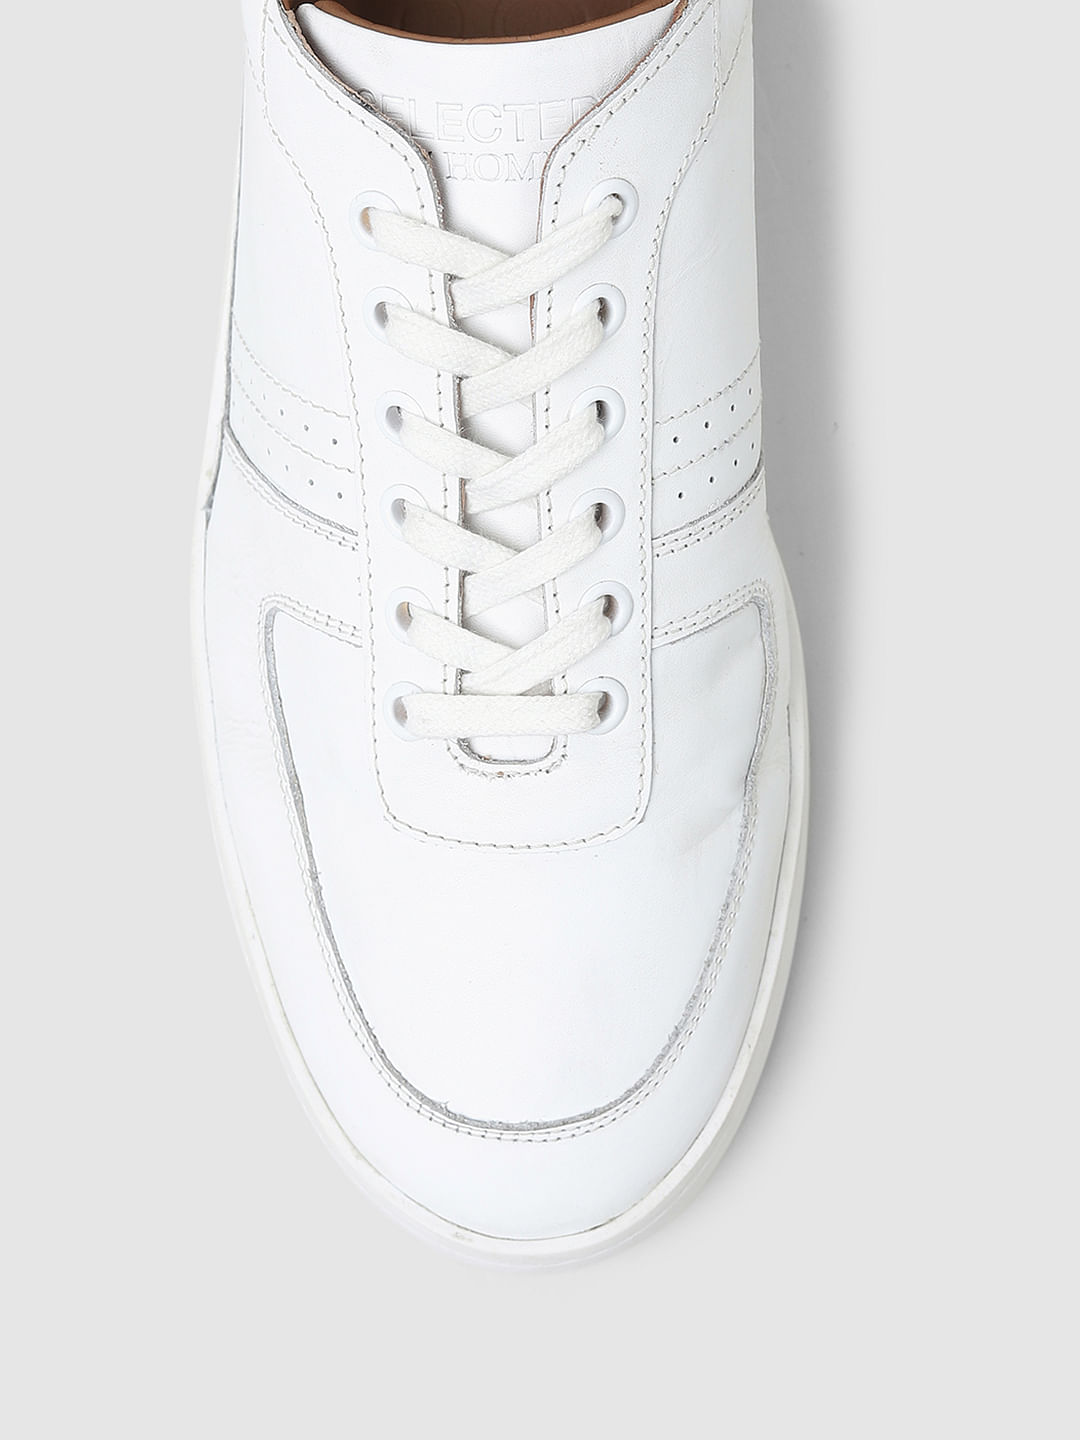 How to Clean White Shoes: Sneakers, Canvas, & More